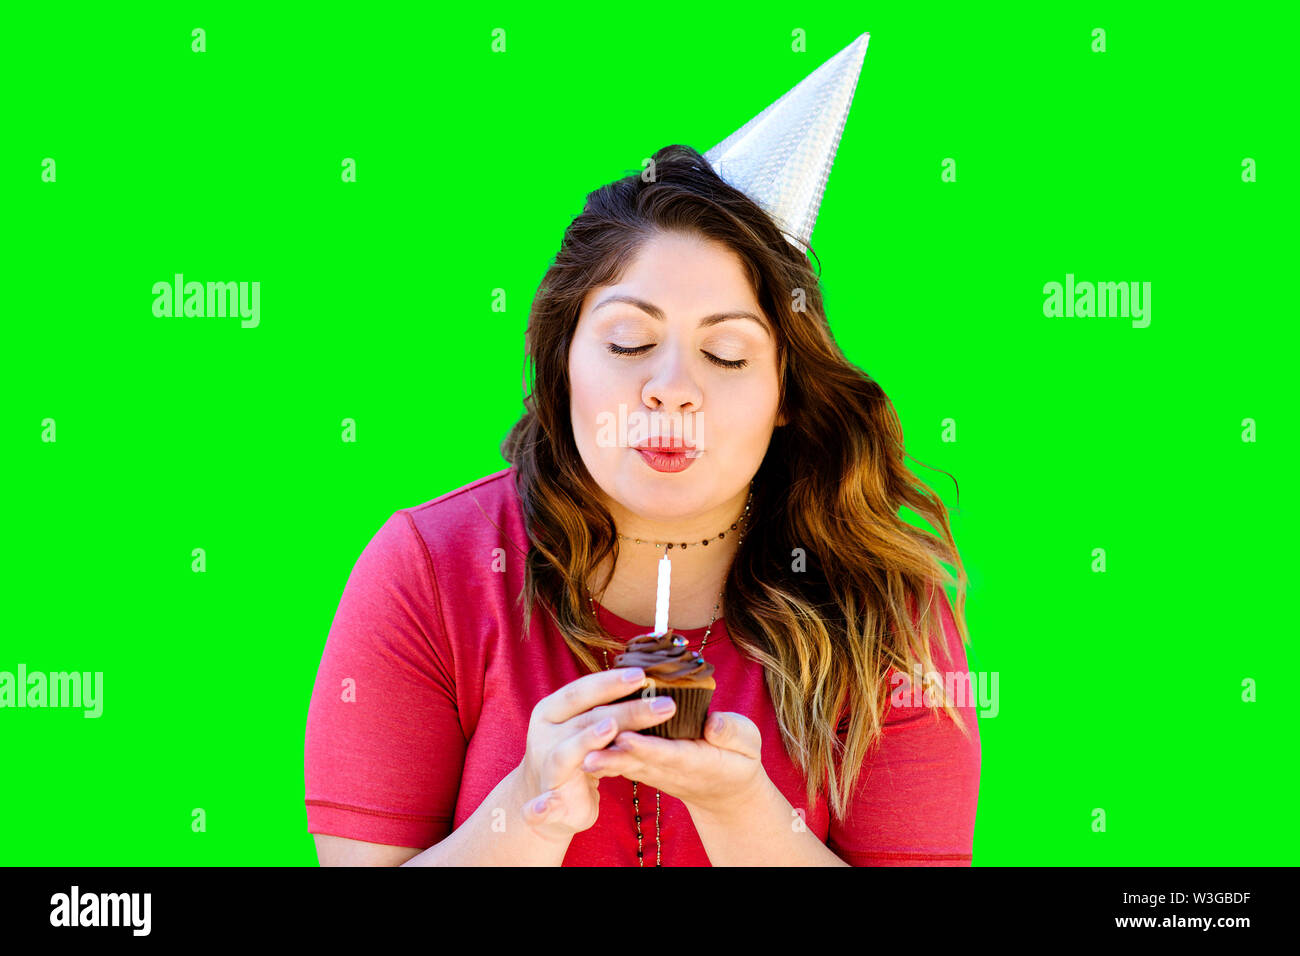 Woman blowing out her birthday candle on a chocolate cupcake on green screen Stock Photo